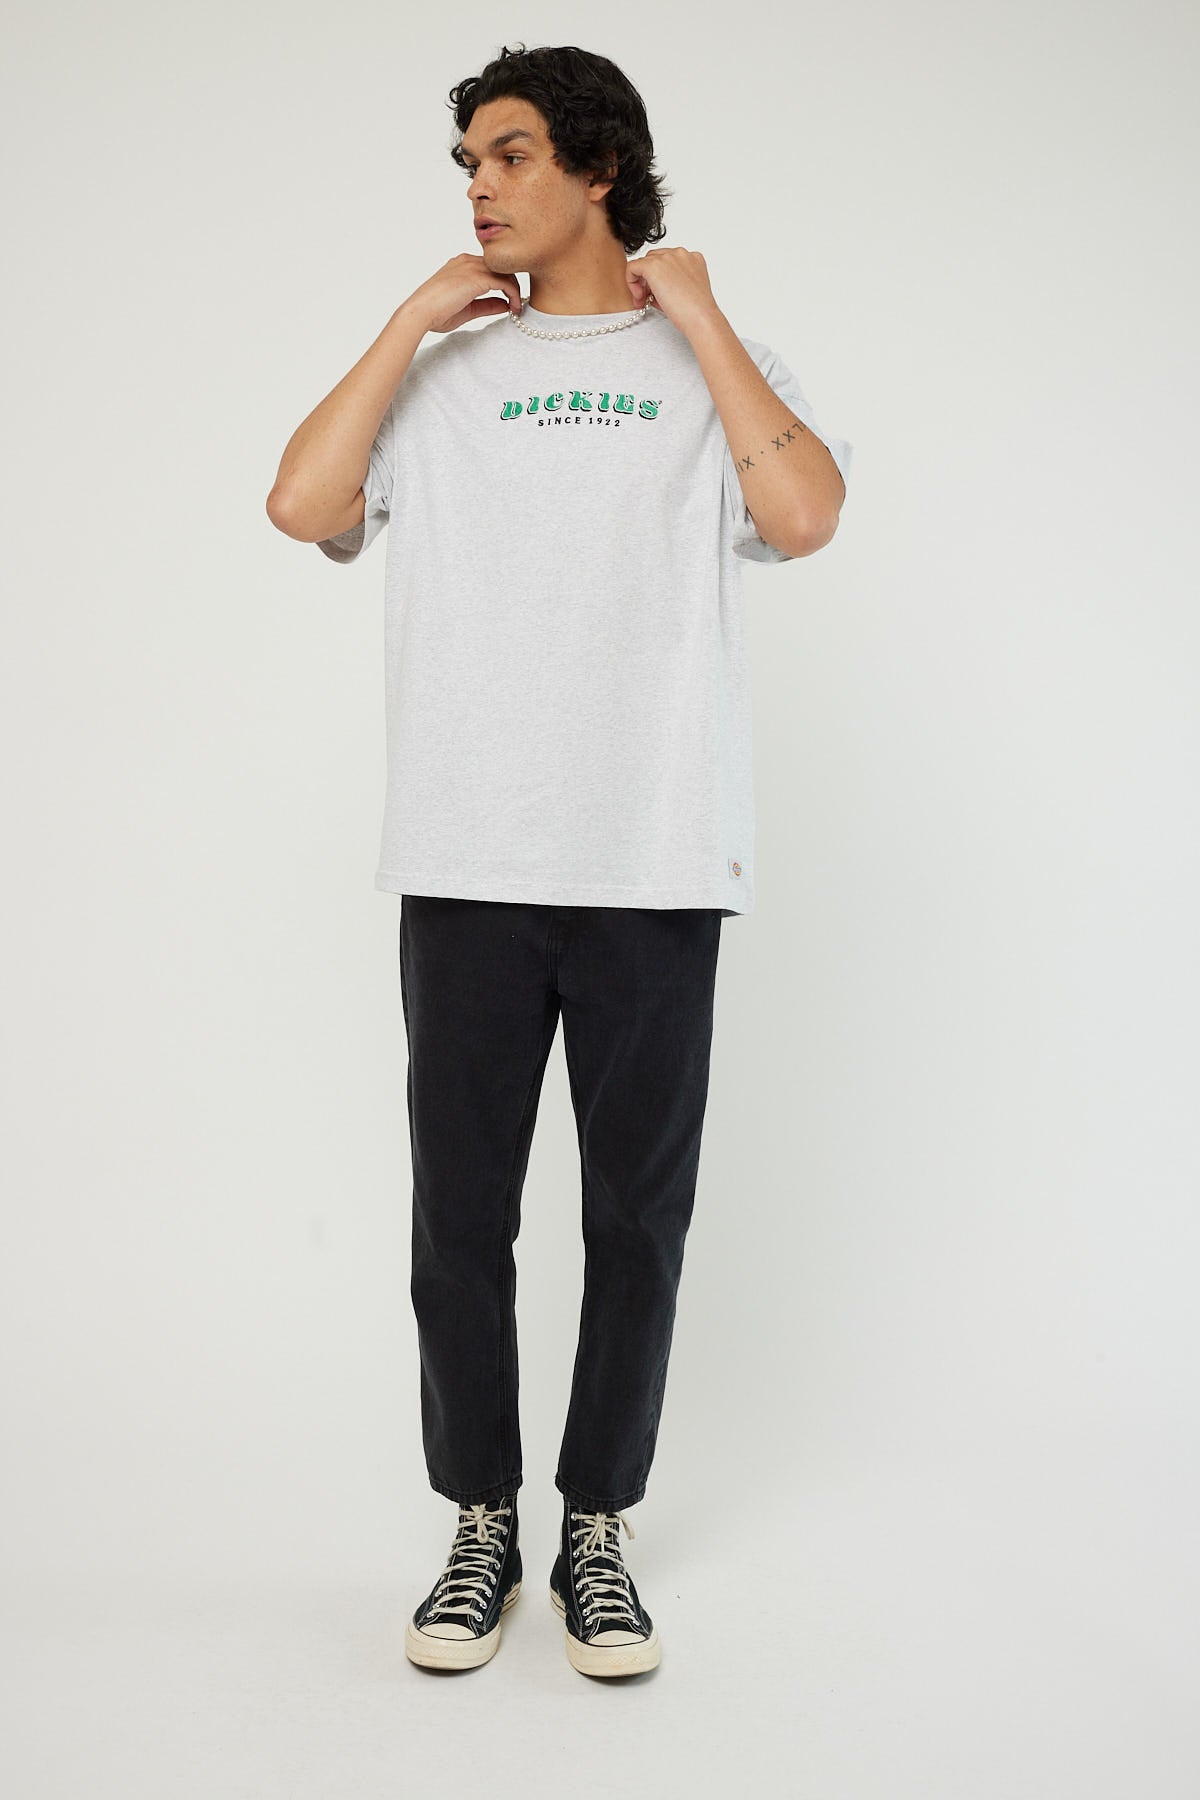 Dickies Clever 330 Oversized Tee Ash Grey